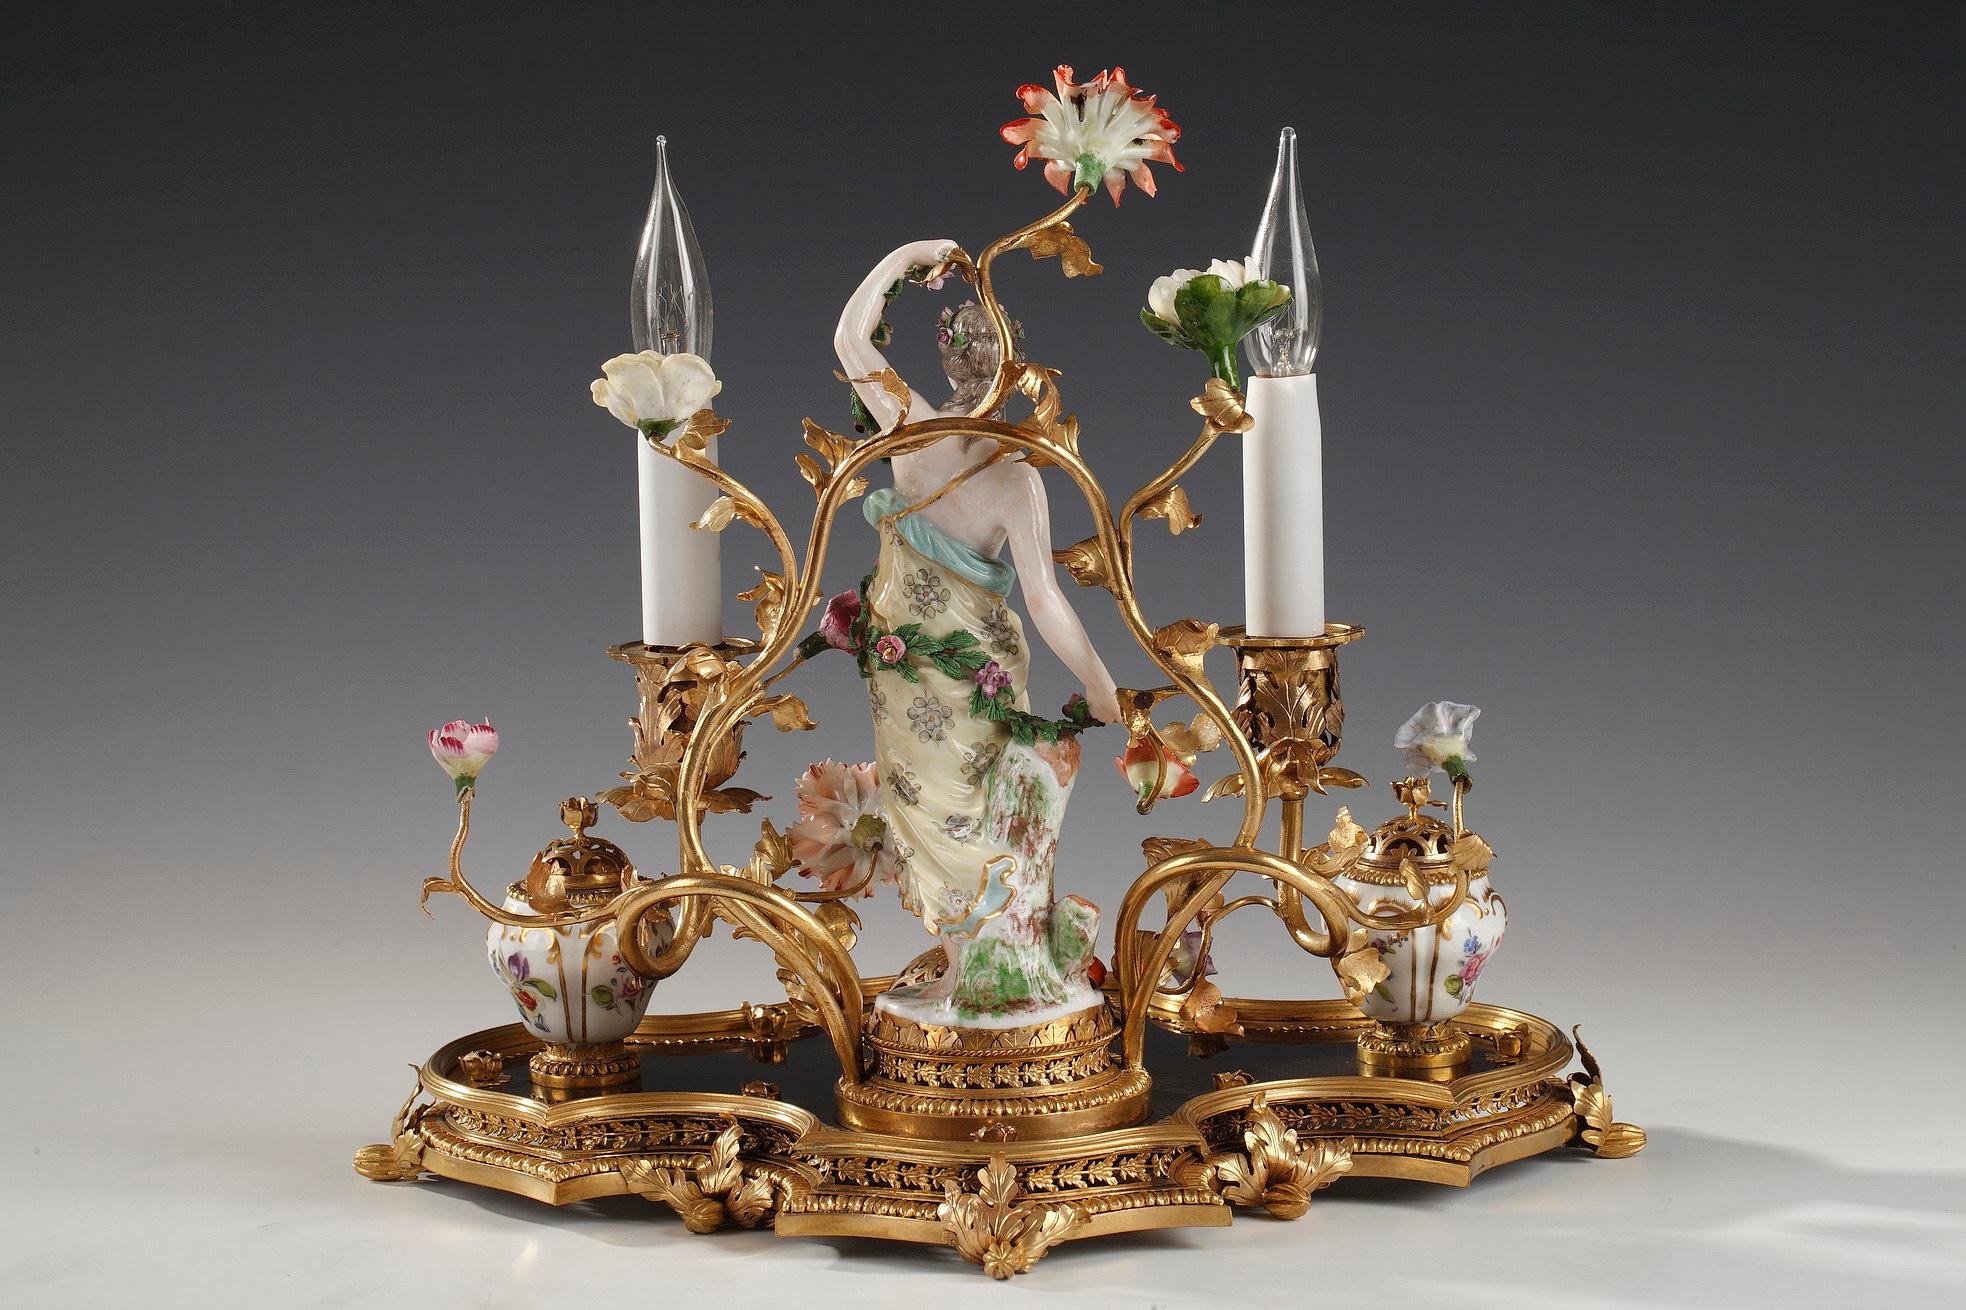 French Porcelain & Bronze Inkwell Attributed to L'Escalier de Cristal, France, c. 1880